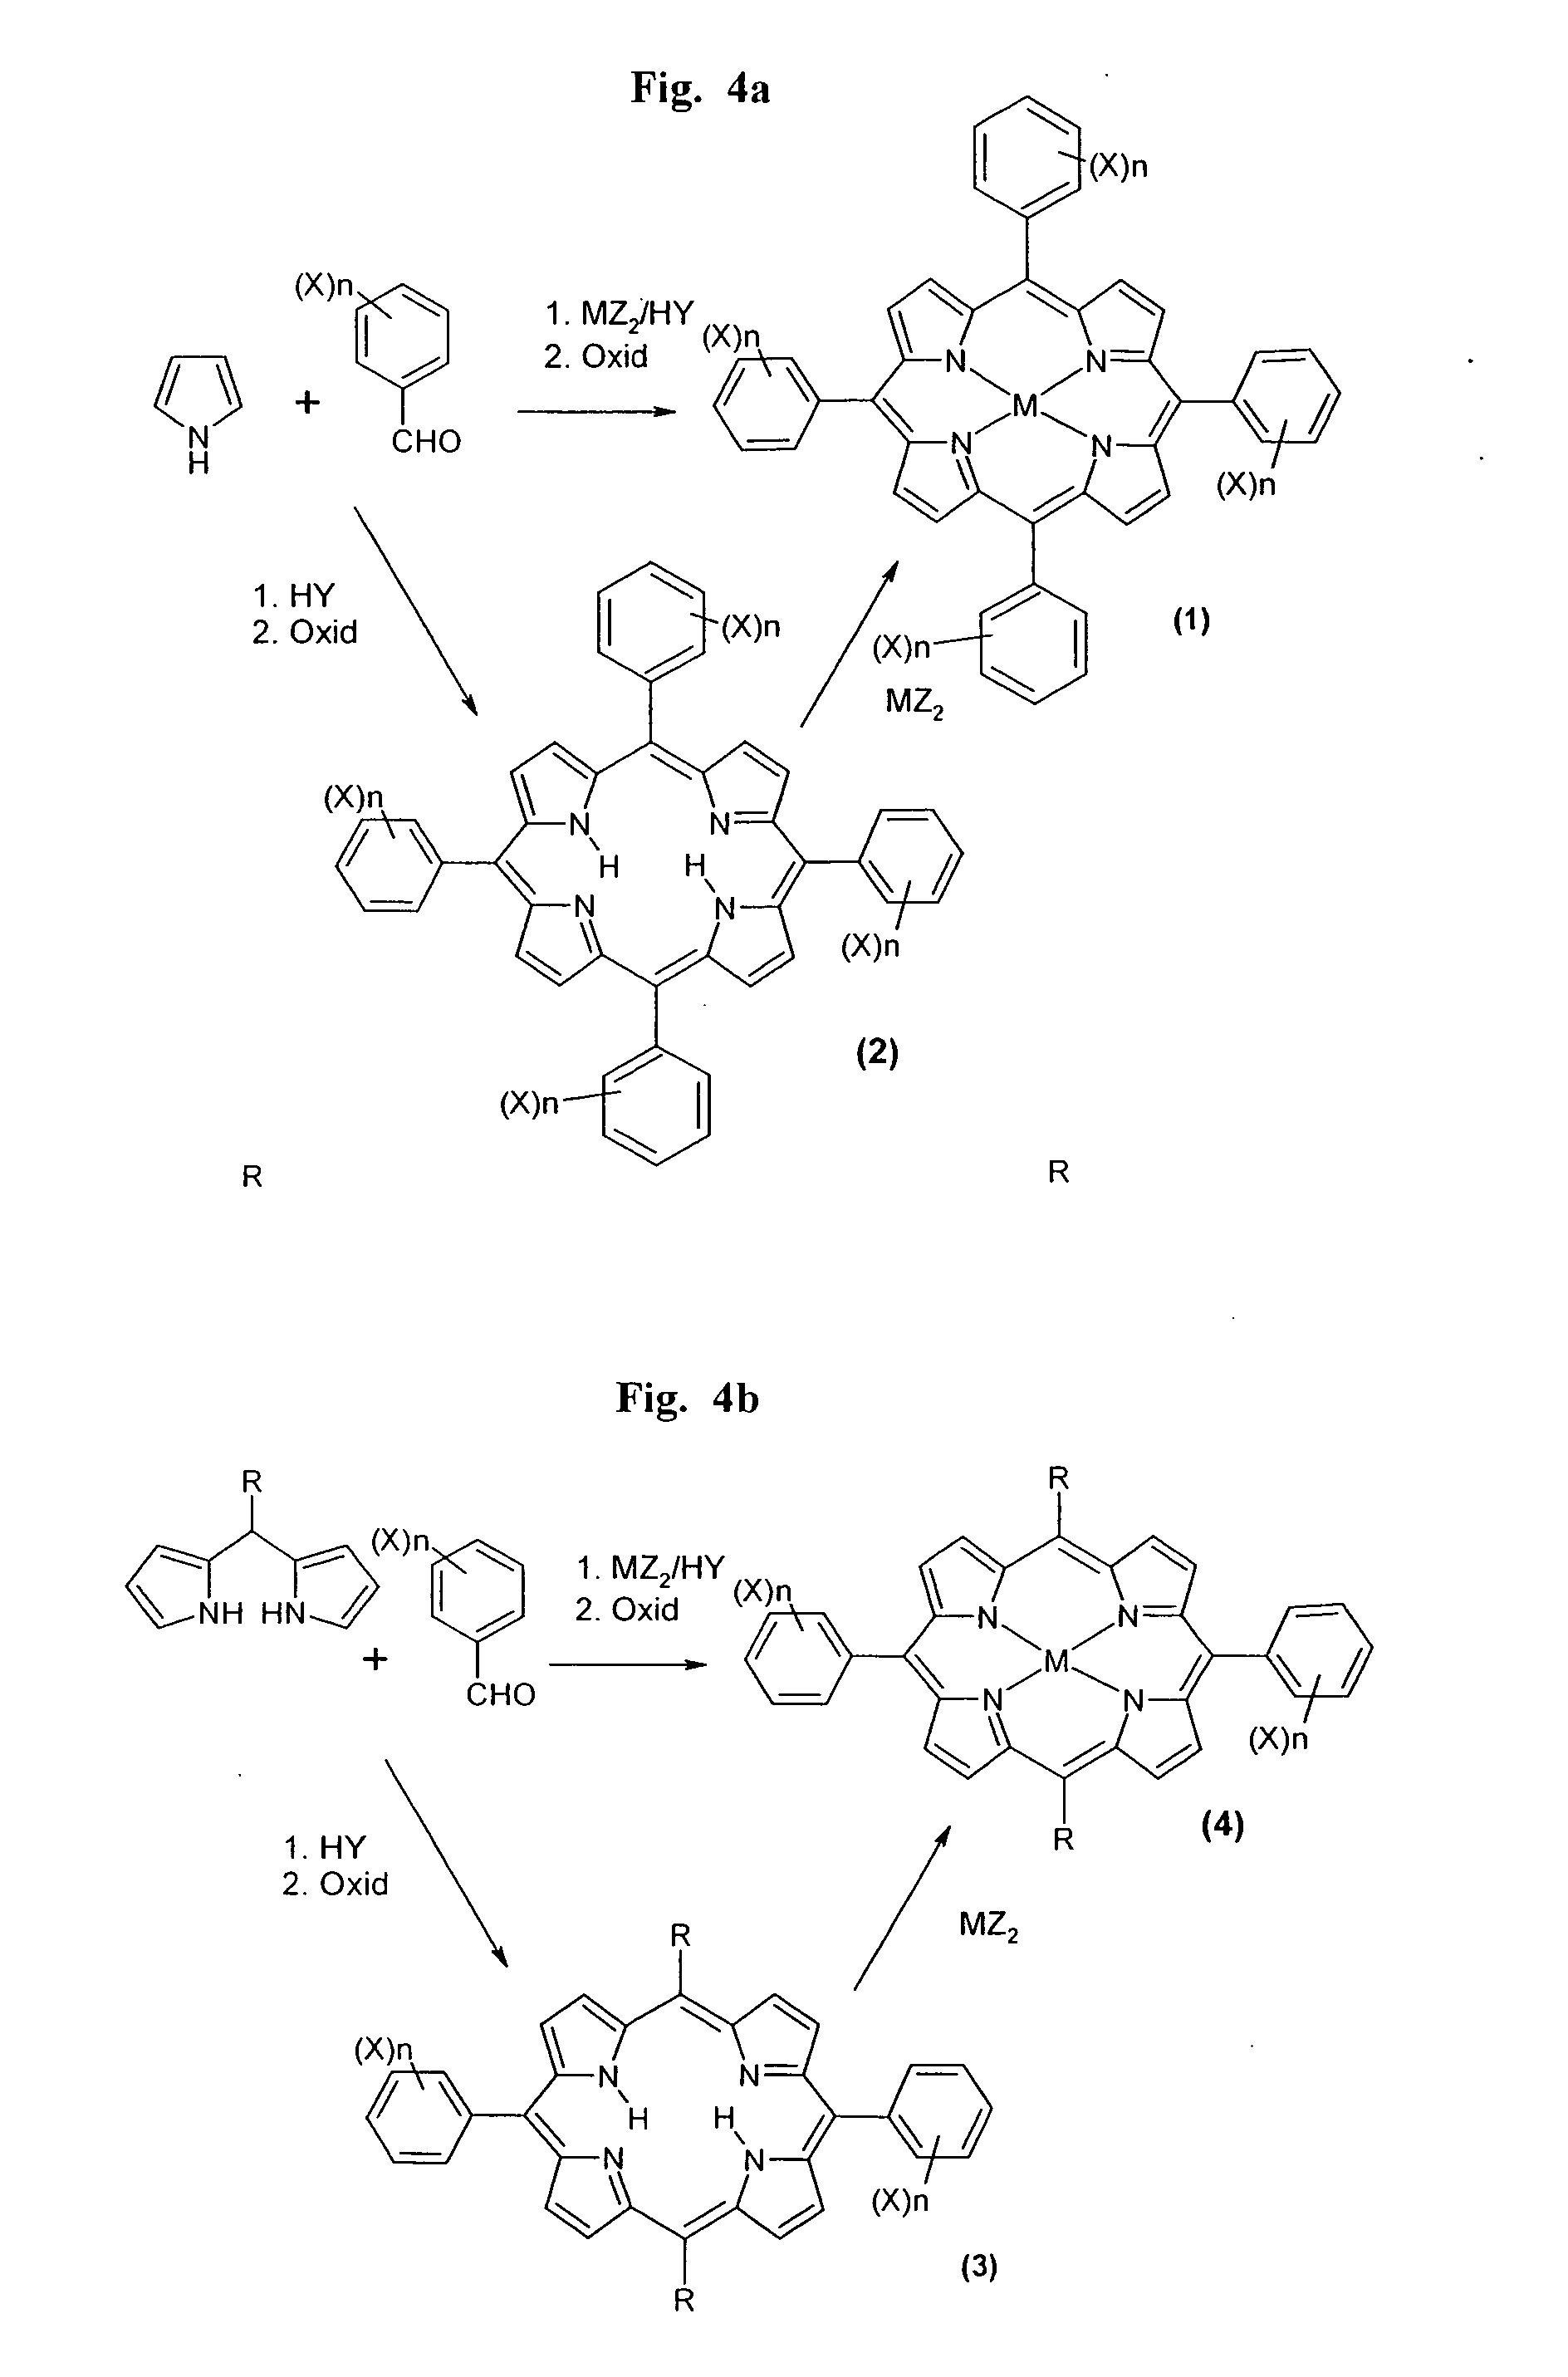 Molecular linkers suitable for crystallization and structural analysis of molecules of interest, method of using same, and methods of purifying g protein-coupled receptors